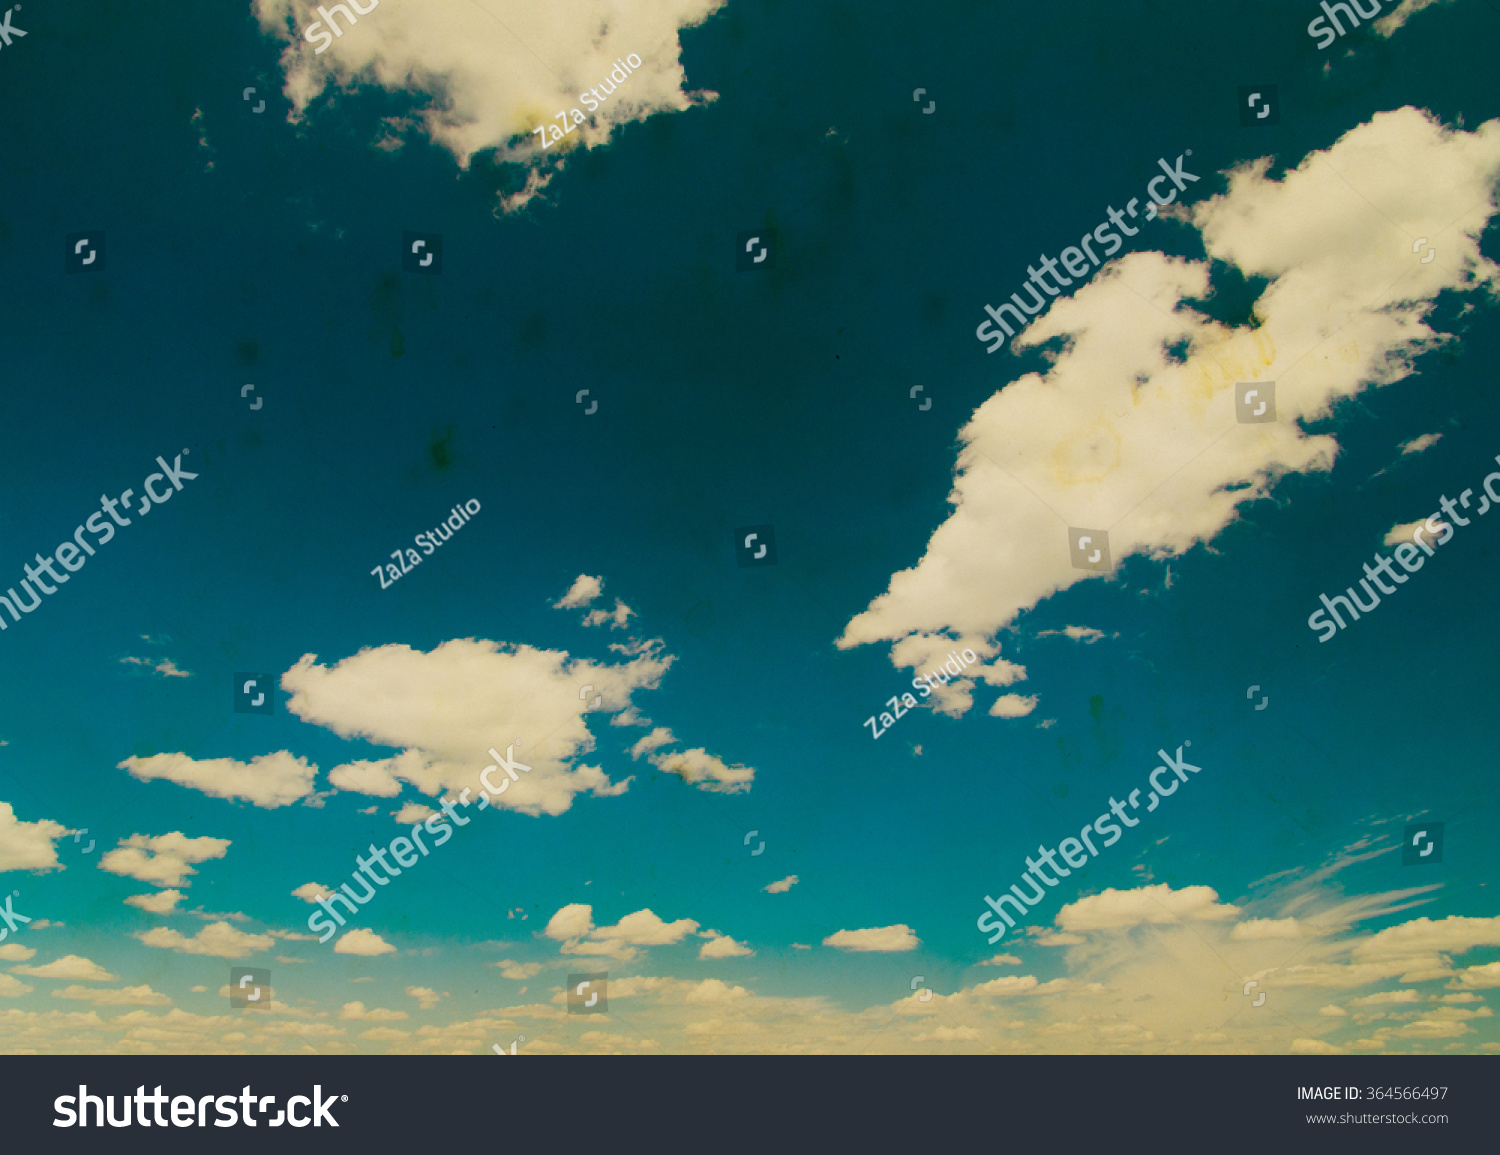 Retro sky and clouds background.  #364566497